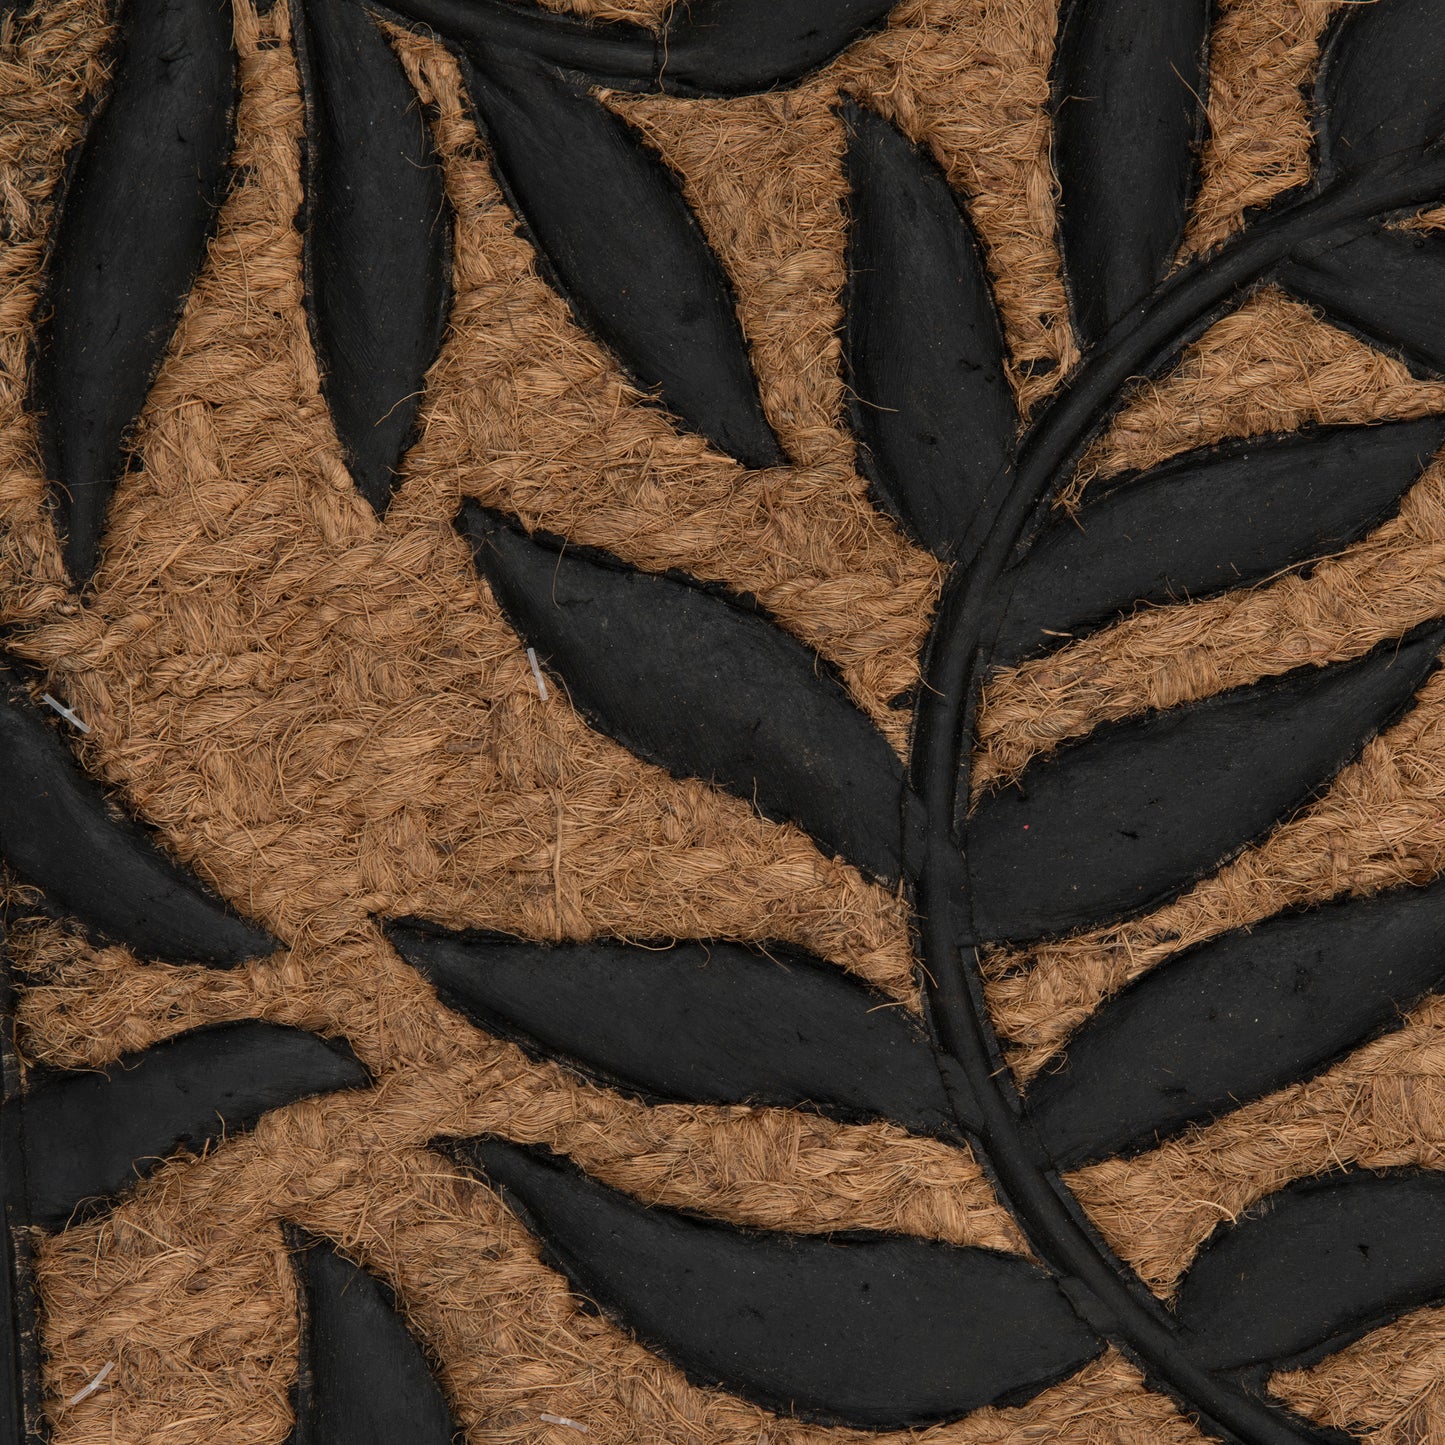 SWHF Premium Coir and Rubber Door Mat: Leaves - SWHF